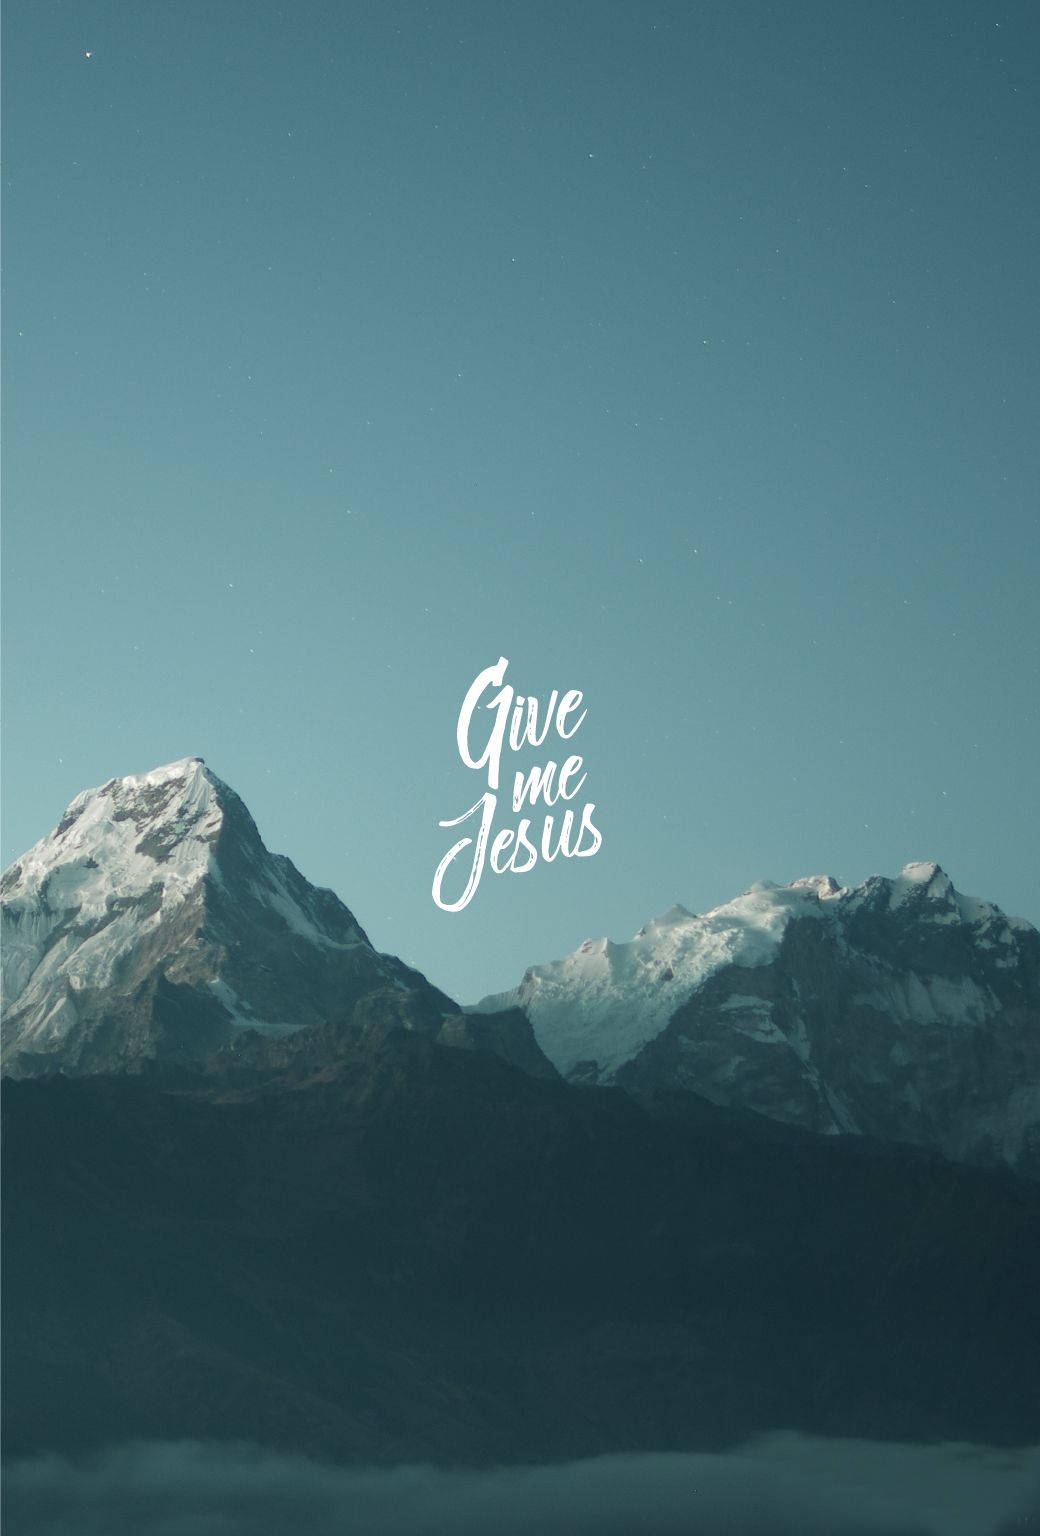 Cute Christian Give Me Jesus Mountains Background